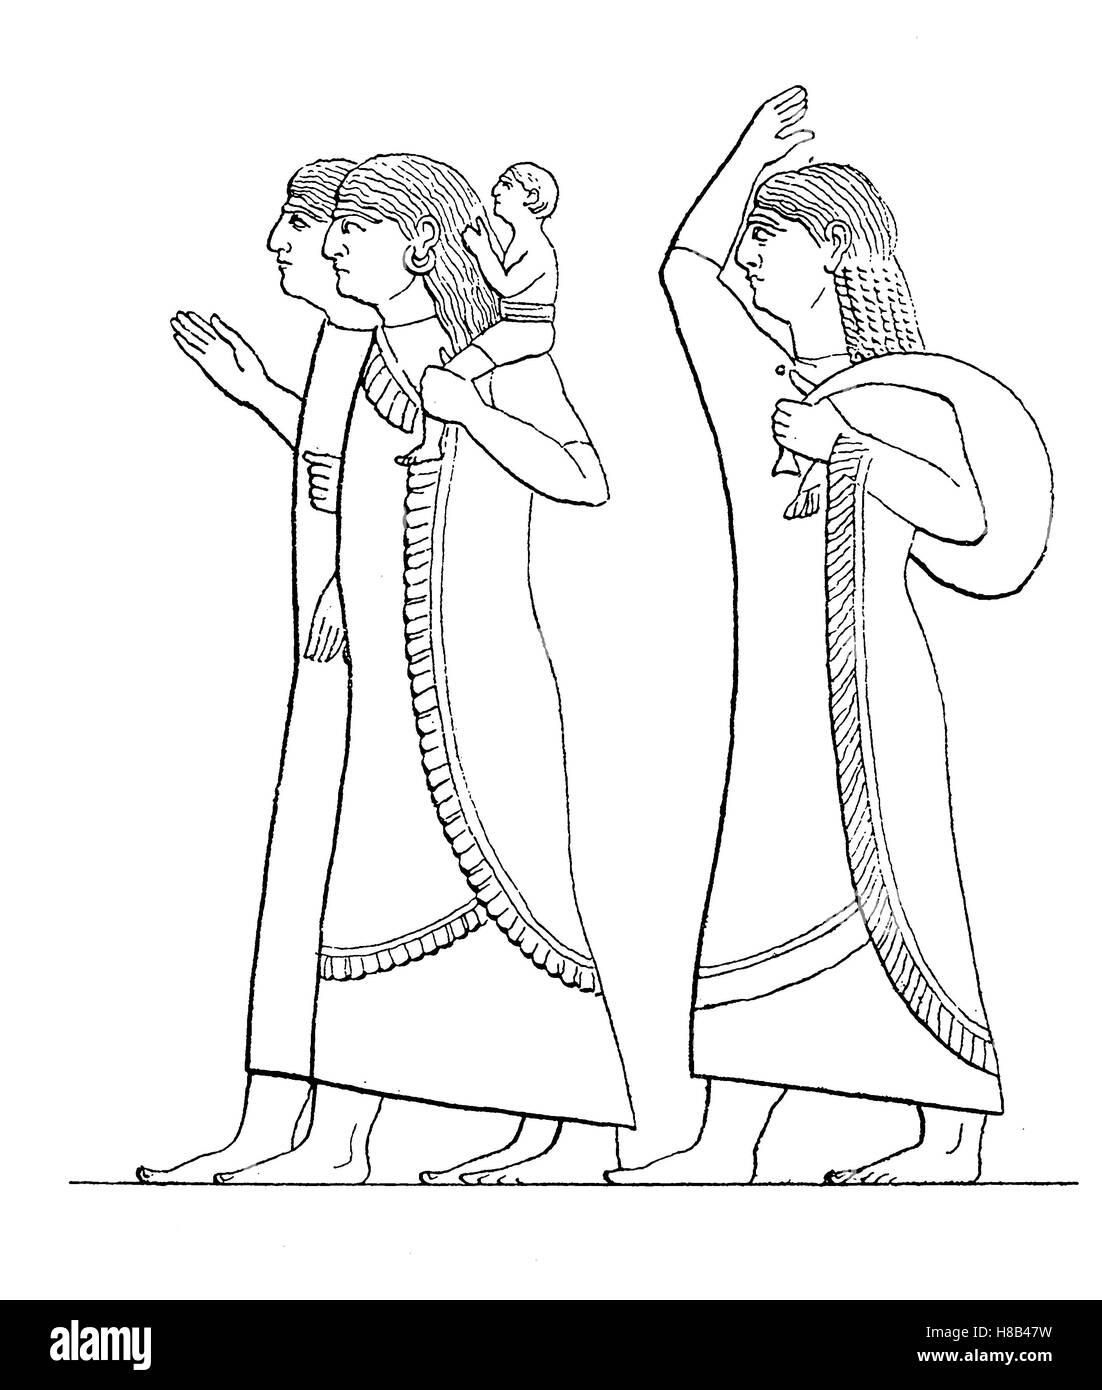 Women's costumes in Assyrian times, about 1300 v. Chr, Egypt, History of fashion, costume story Stock Photo